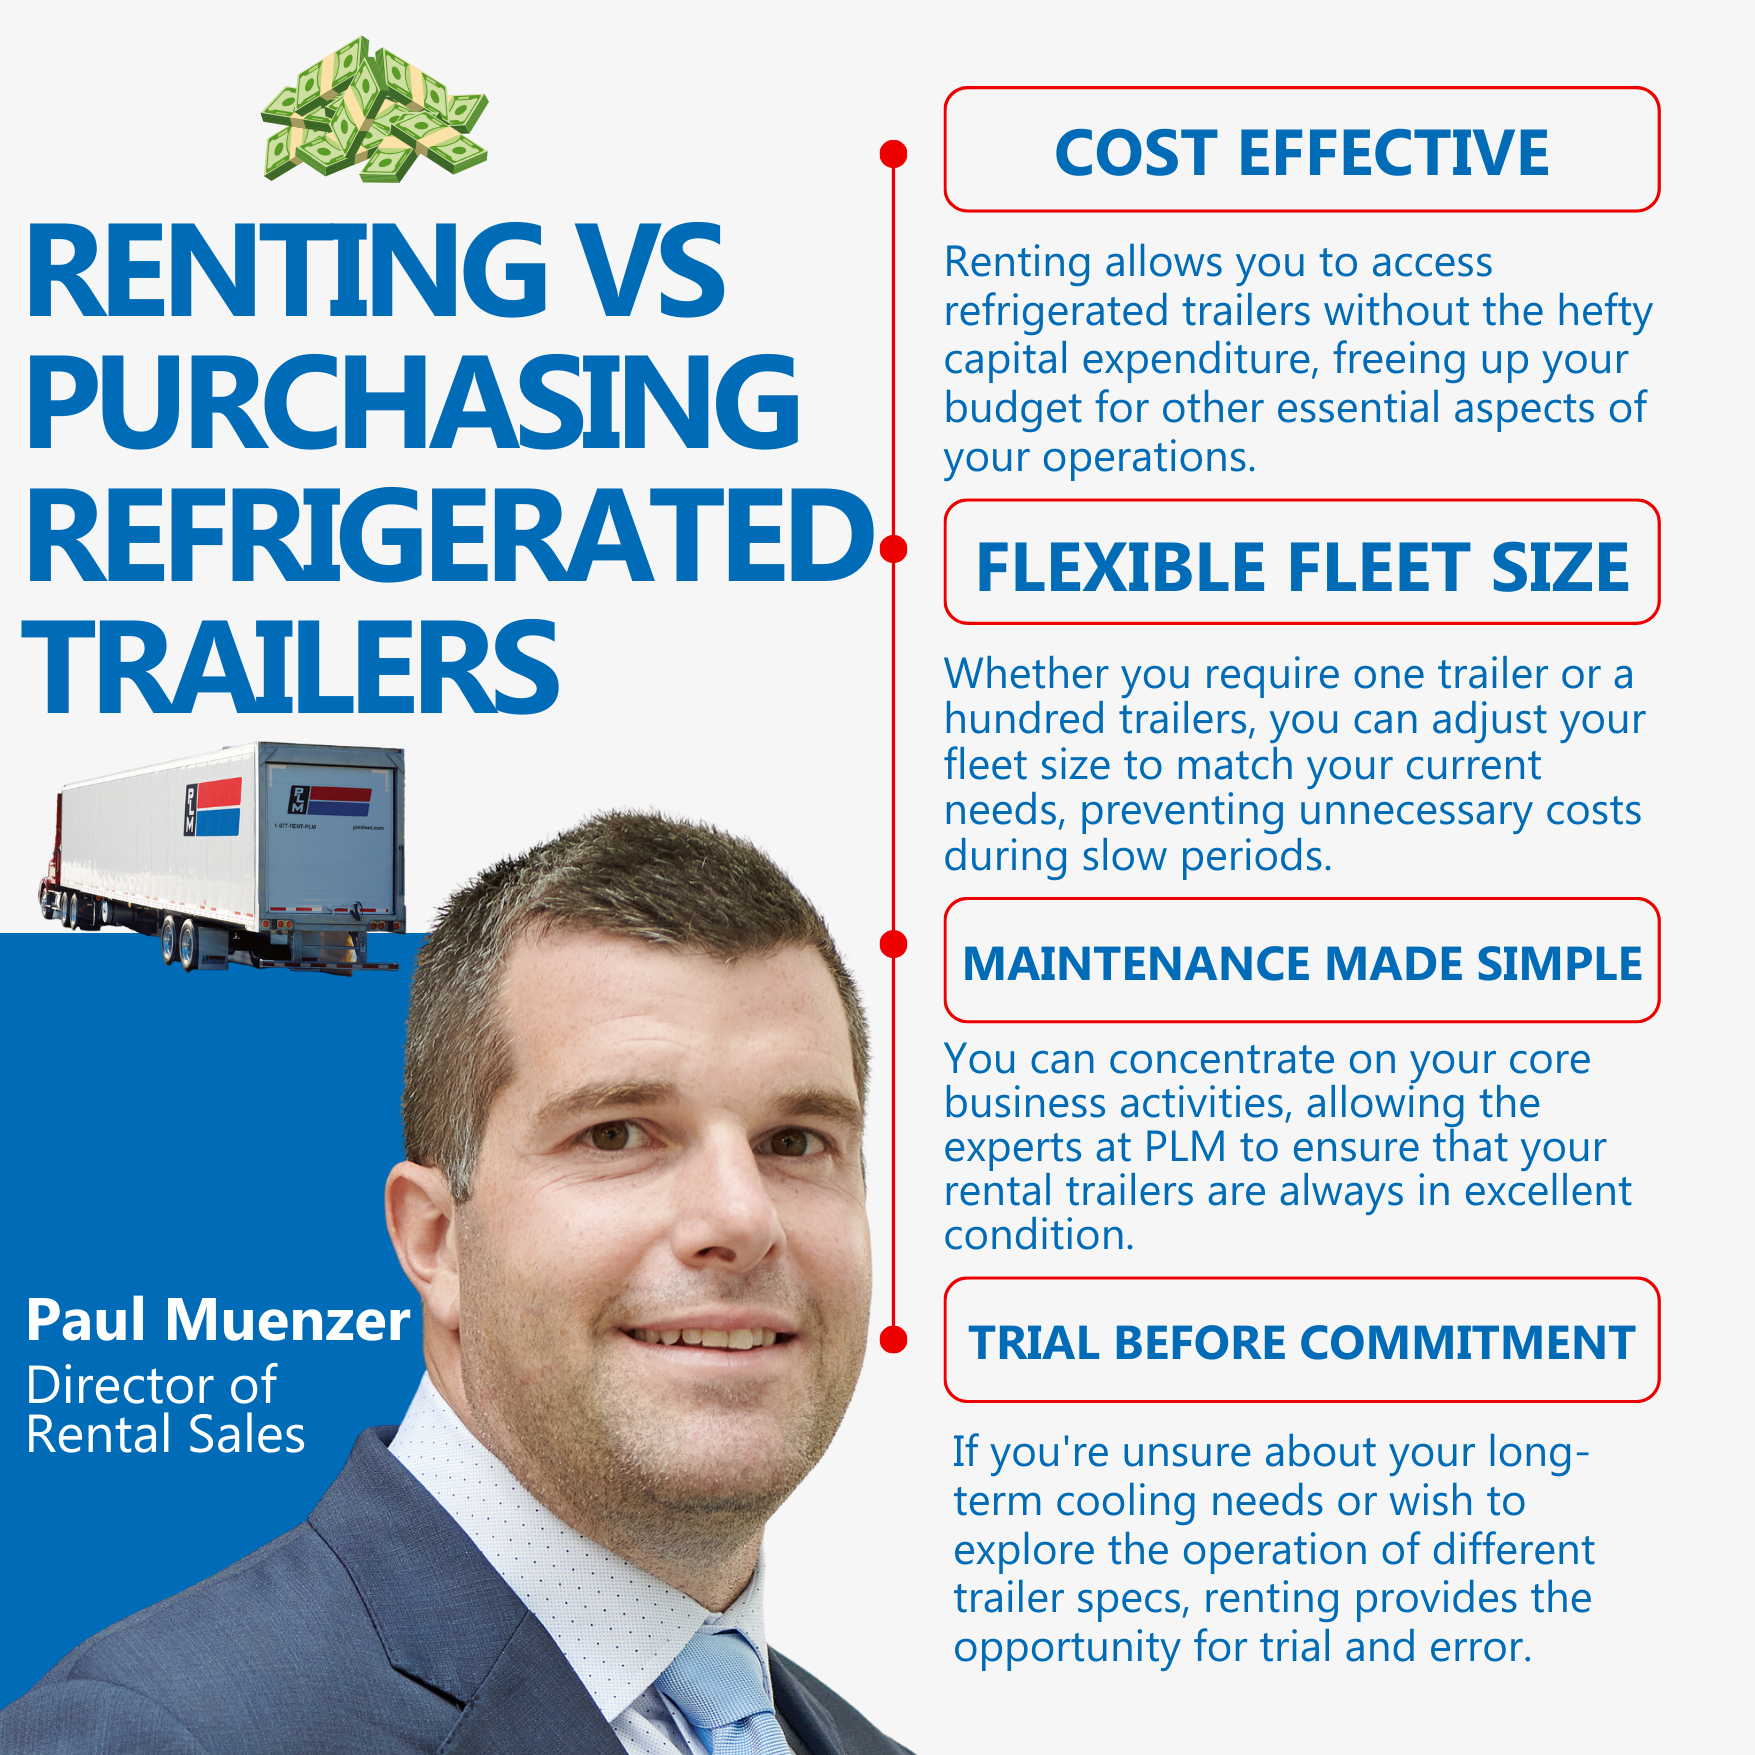 Why should you rent instead of purchase refrigerated trailers? Renting is cost effective, allows you to have a flexible fleet size, offers full-service fleet maintenance, and allows you to trial before commitment.